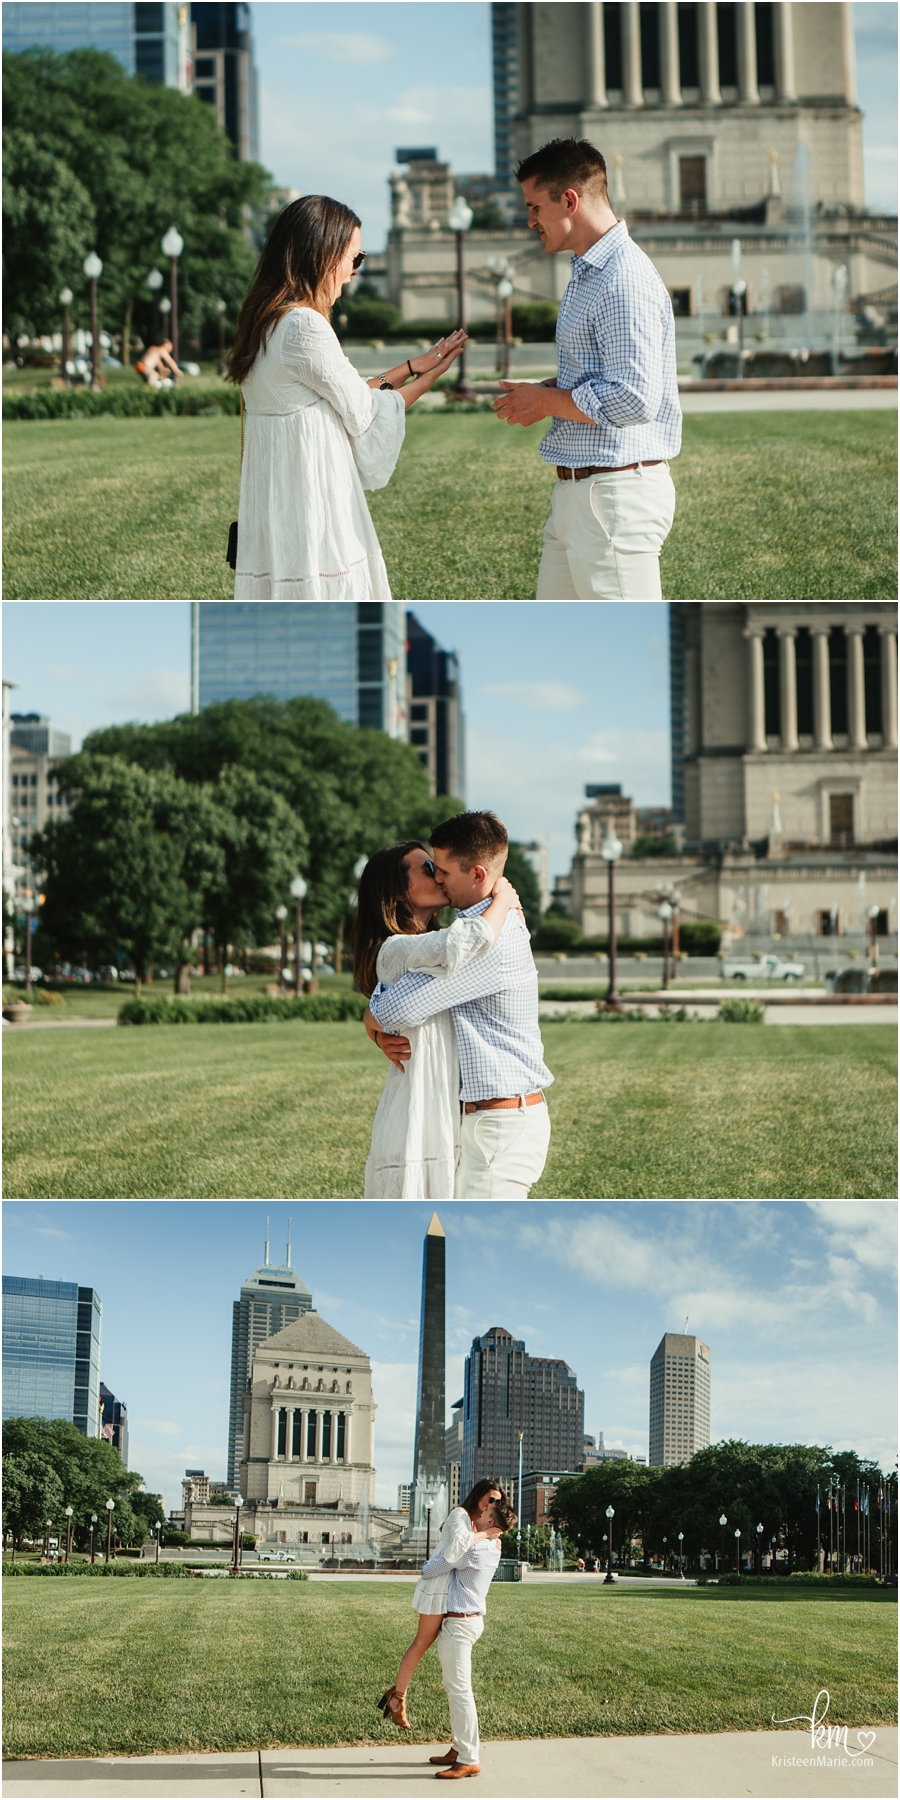 Moments after proposal - Indianapolis proposal photographer